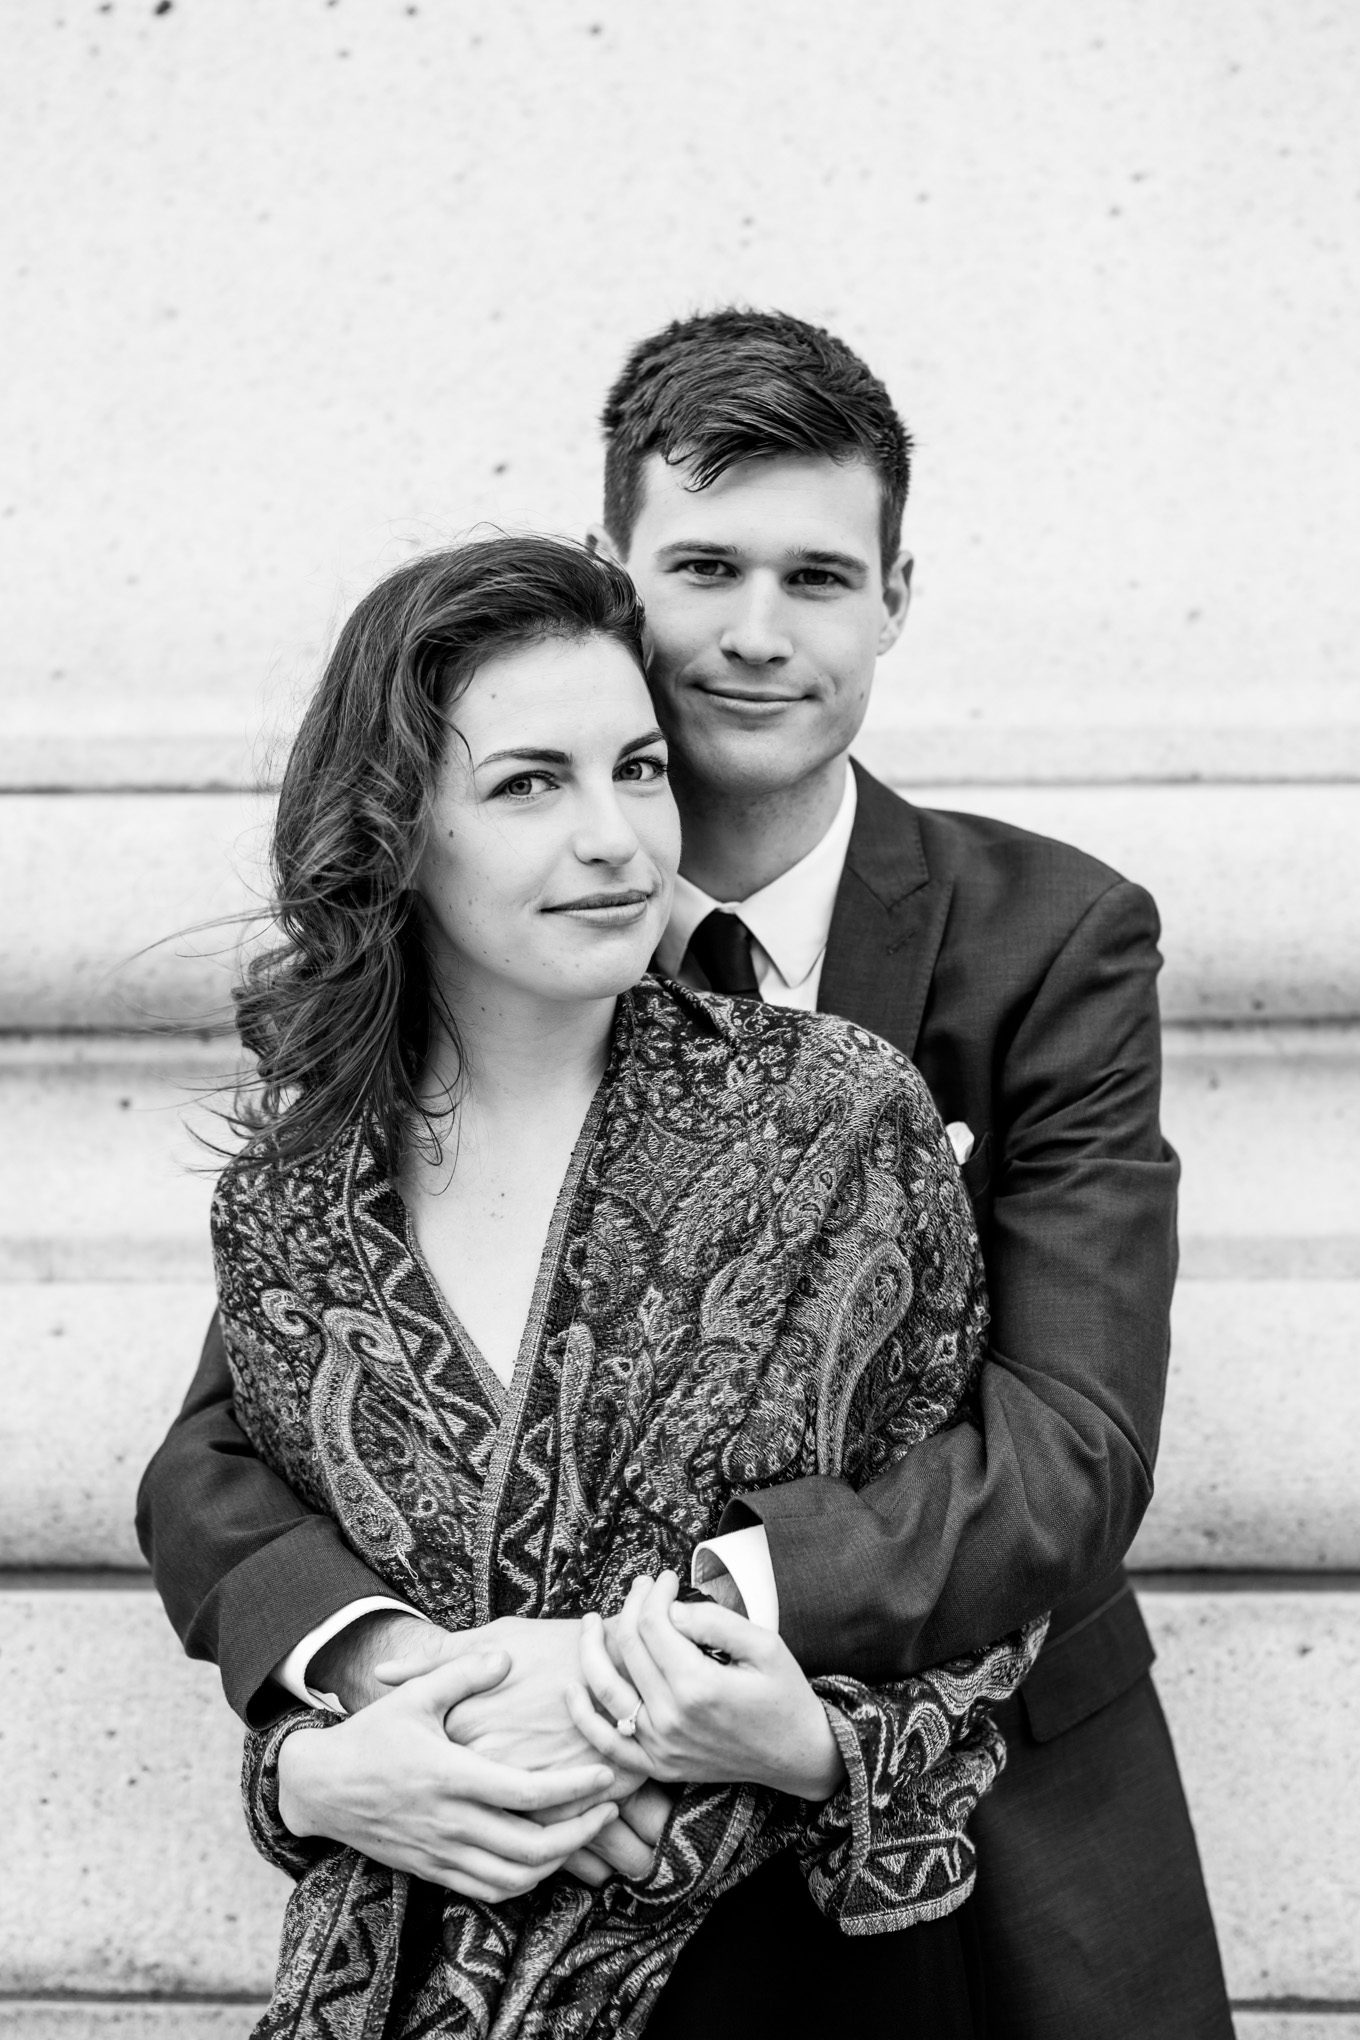 black and white engagement photos, black and white photography, black and white photos, engagement photos, black and white D.C., D.C. engagement photos, classic engagement photos, traditional engagement photos, engagement photos poses, classic architecture, D.C. architecture, Union Station D.C., Union Station, engaged couple, relationship goals, joyful couple, black and white sessions, Liv Tyler vibes